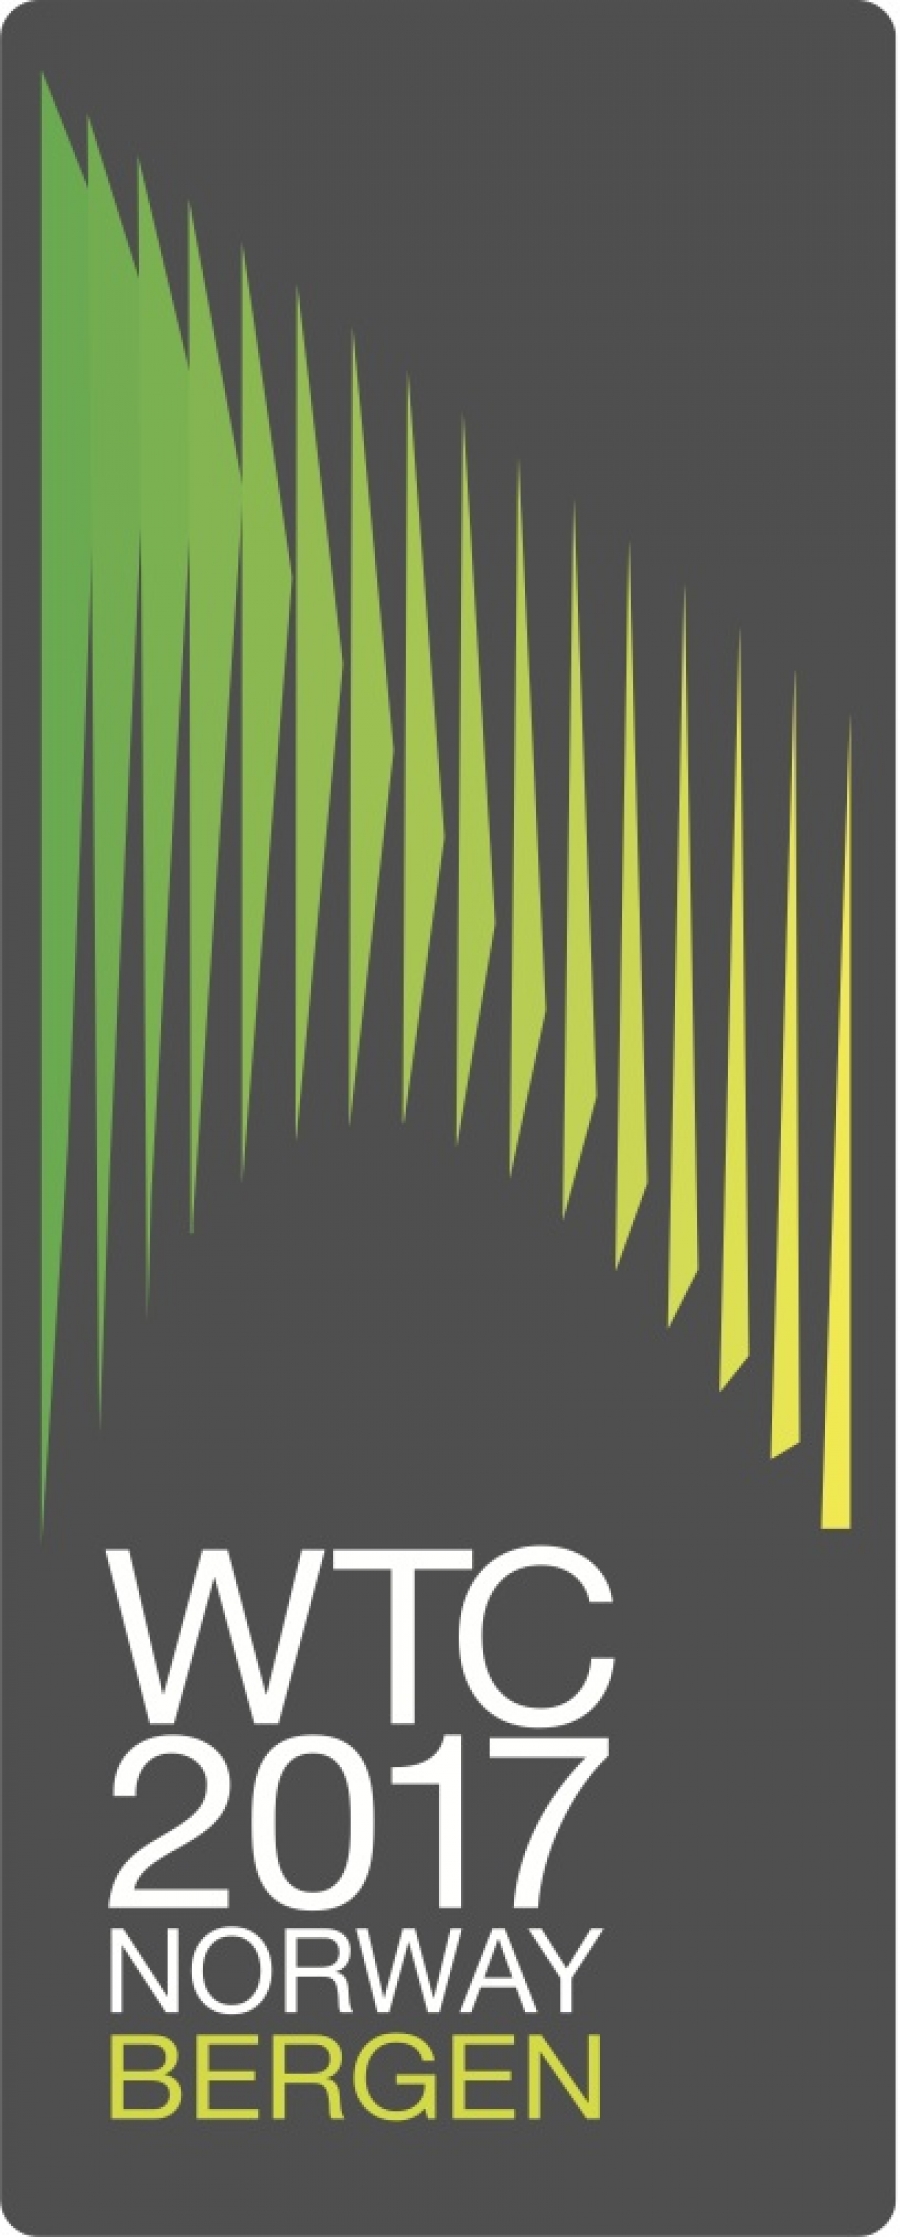 The program for WTC 2017 is falling into place